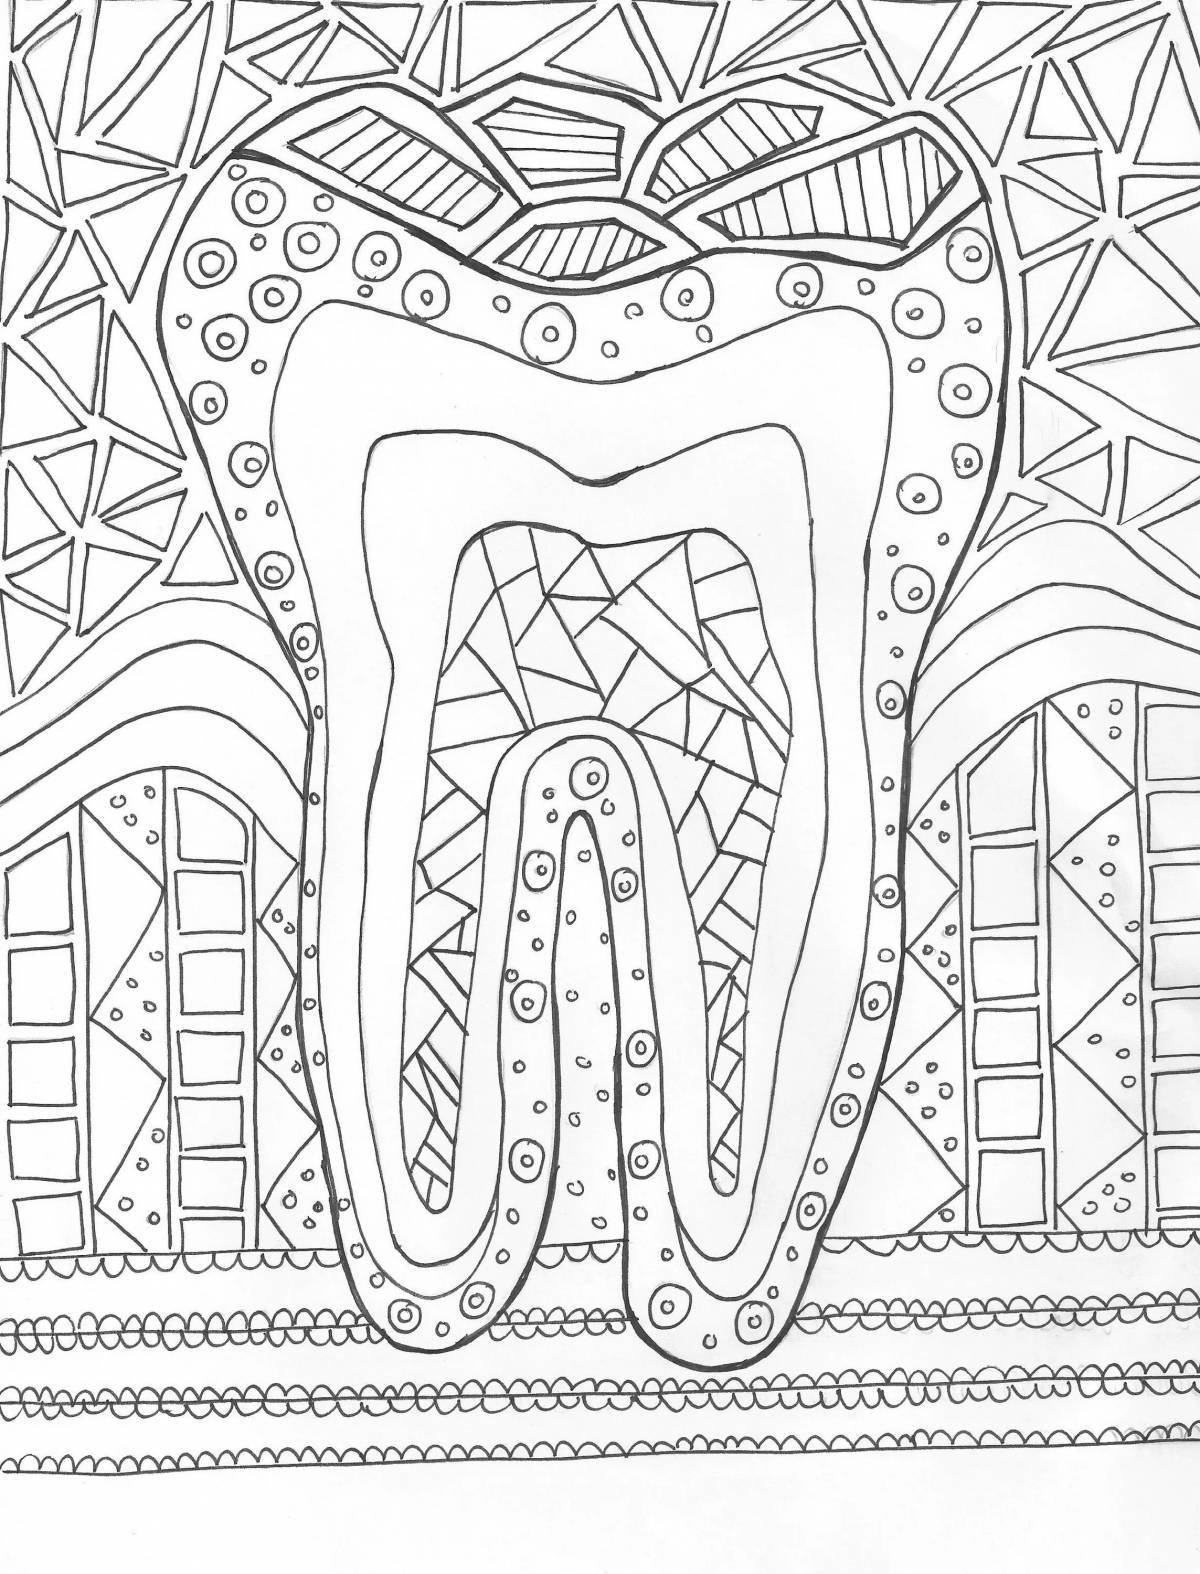 Complex dentistry coloring book